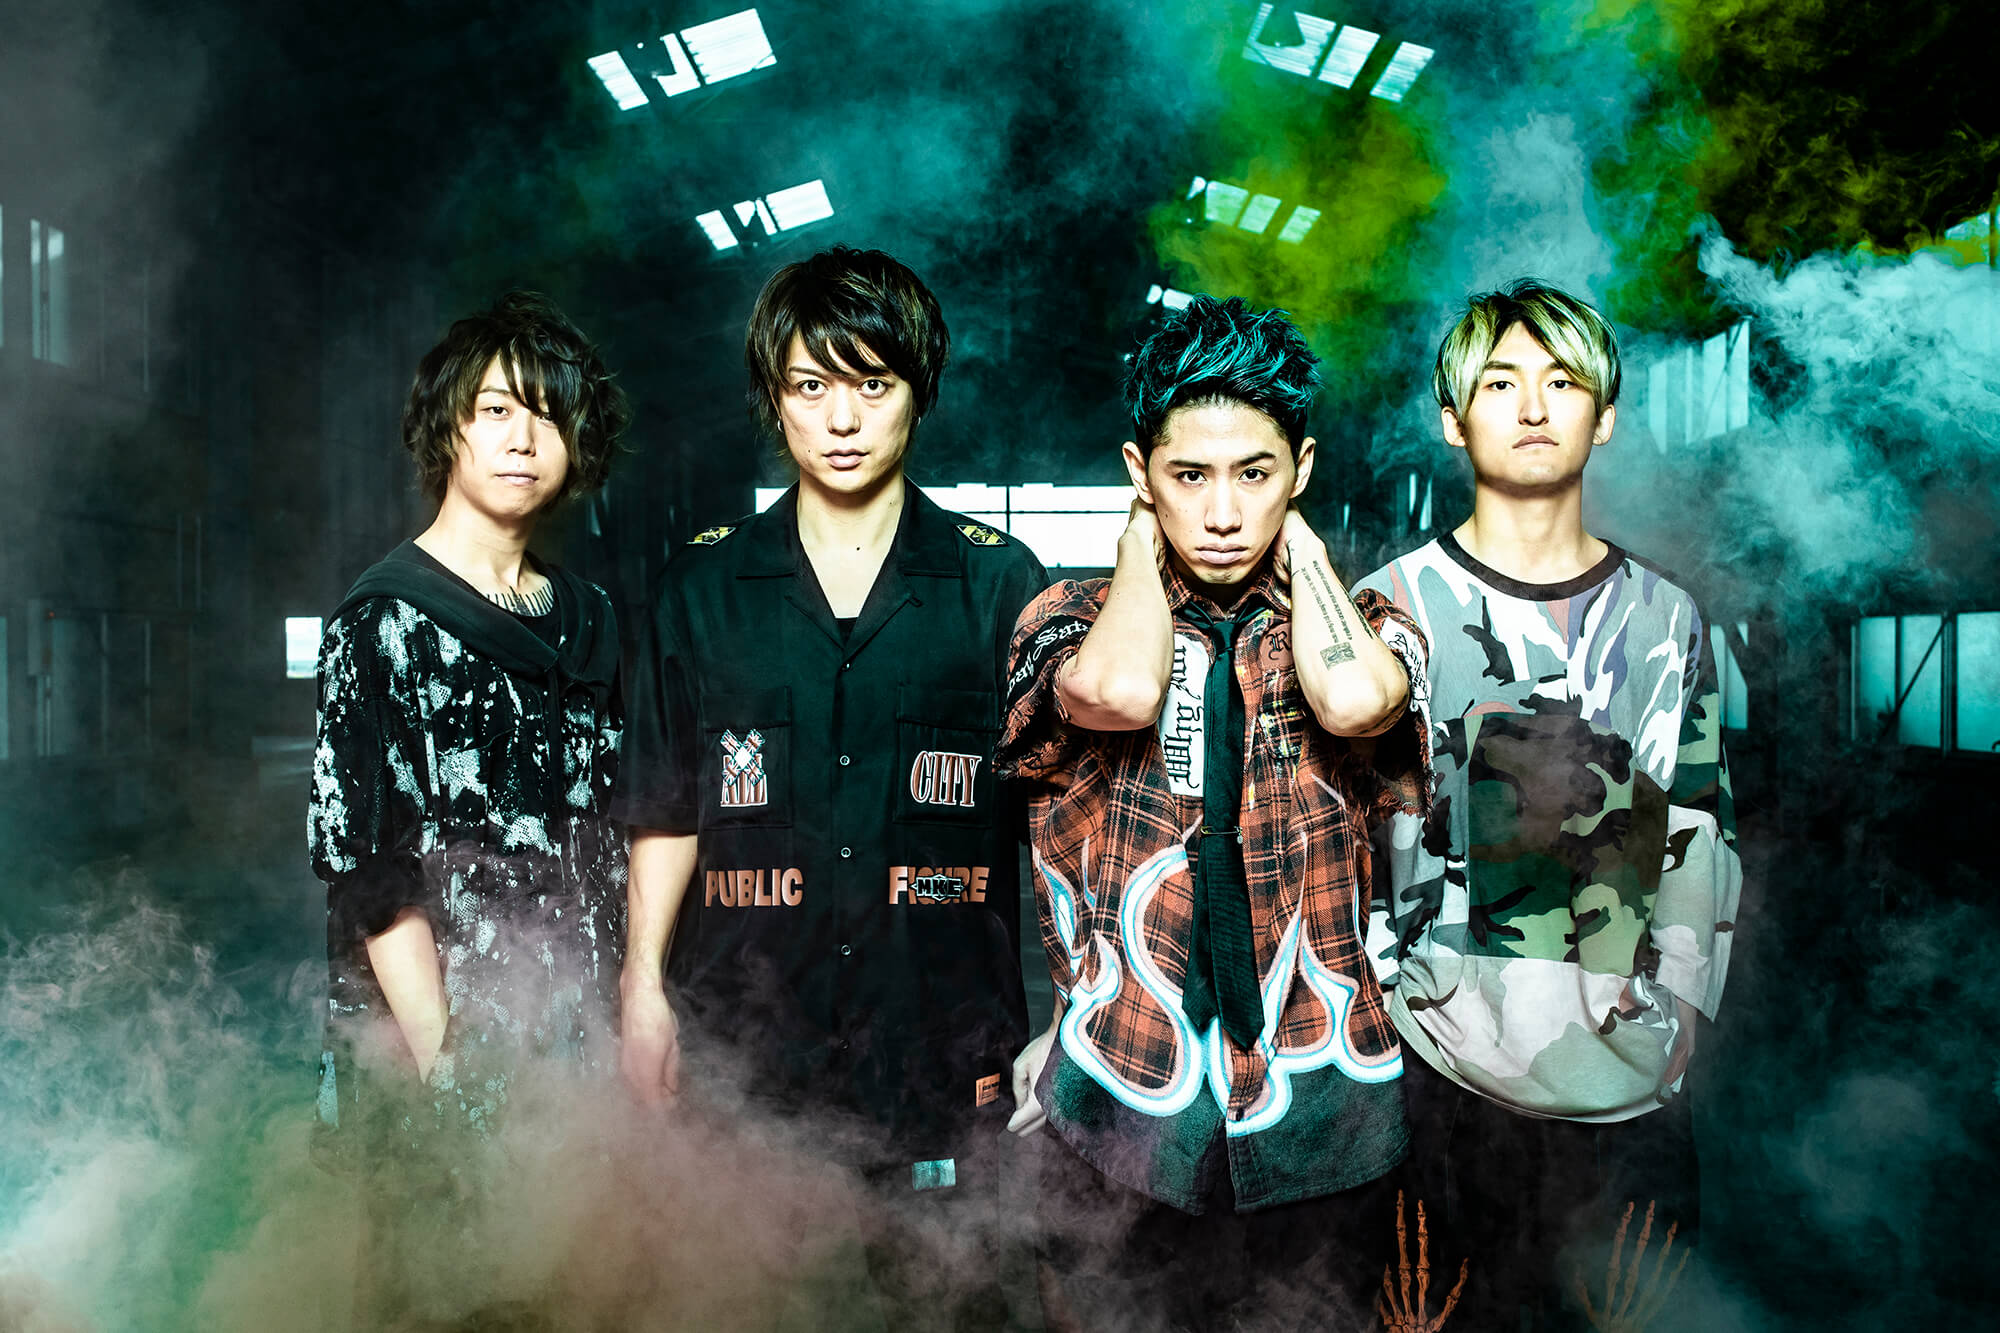 WATCH ONE OK ROCK PERFORM “WASTED NIGHTS” LIVE ON THE ‘EYE OF THE STORM’ JAPAN TOUR